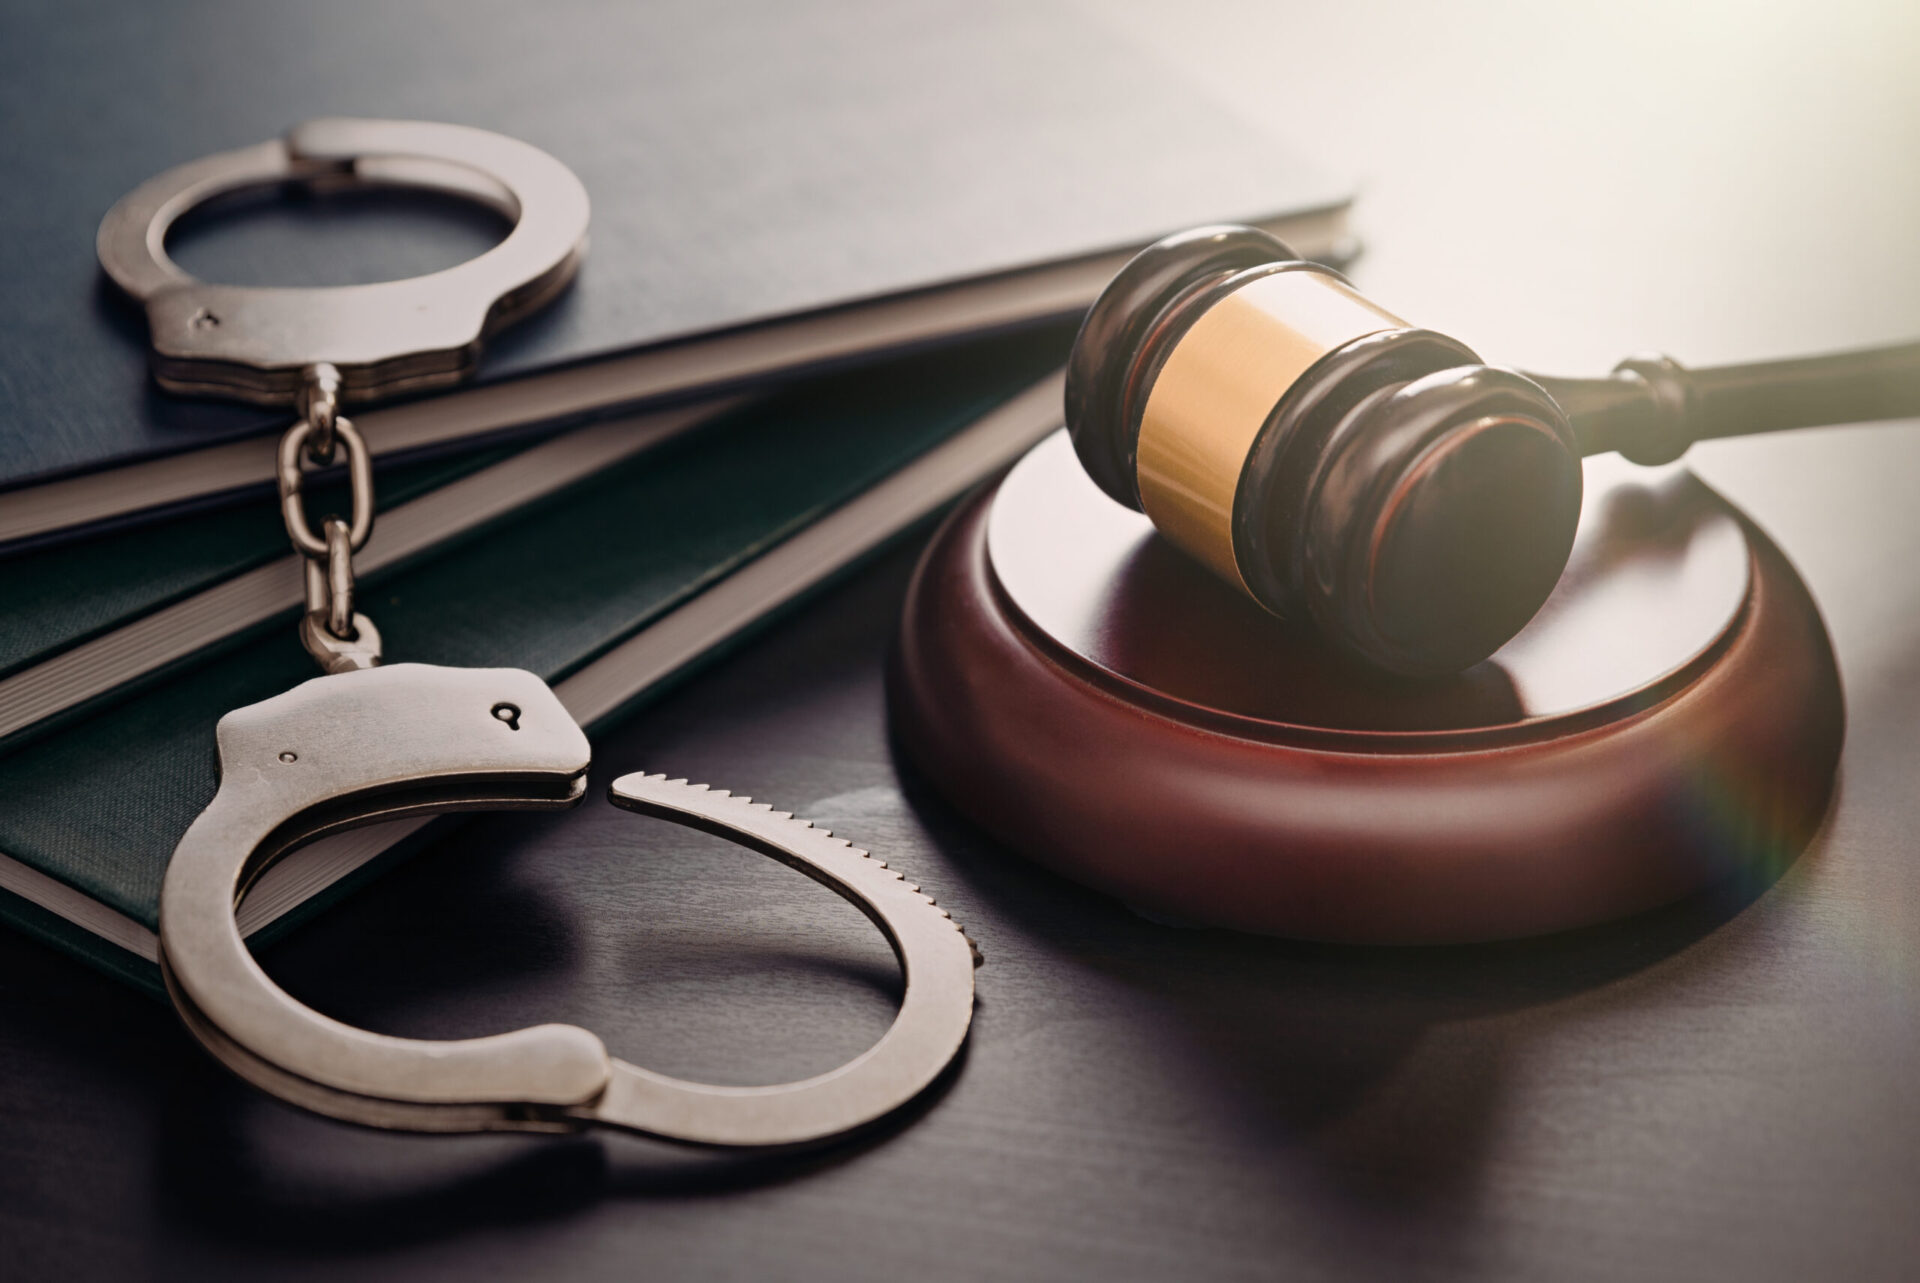 California Broker Sentenced To Years In Prison For Mortgage Loan Fraud